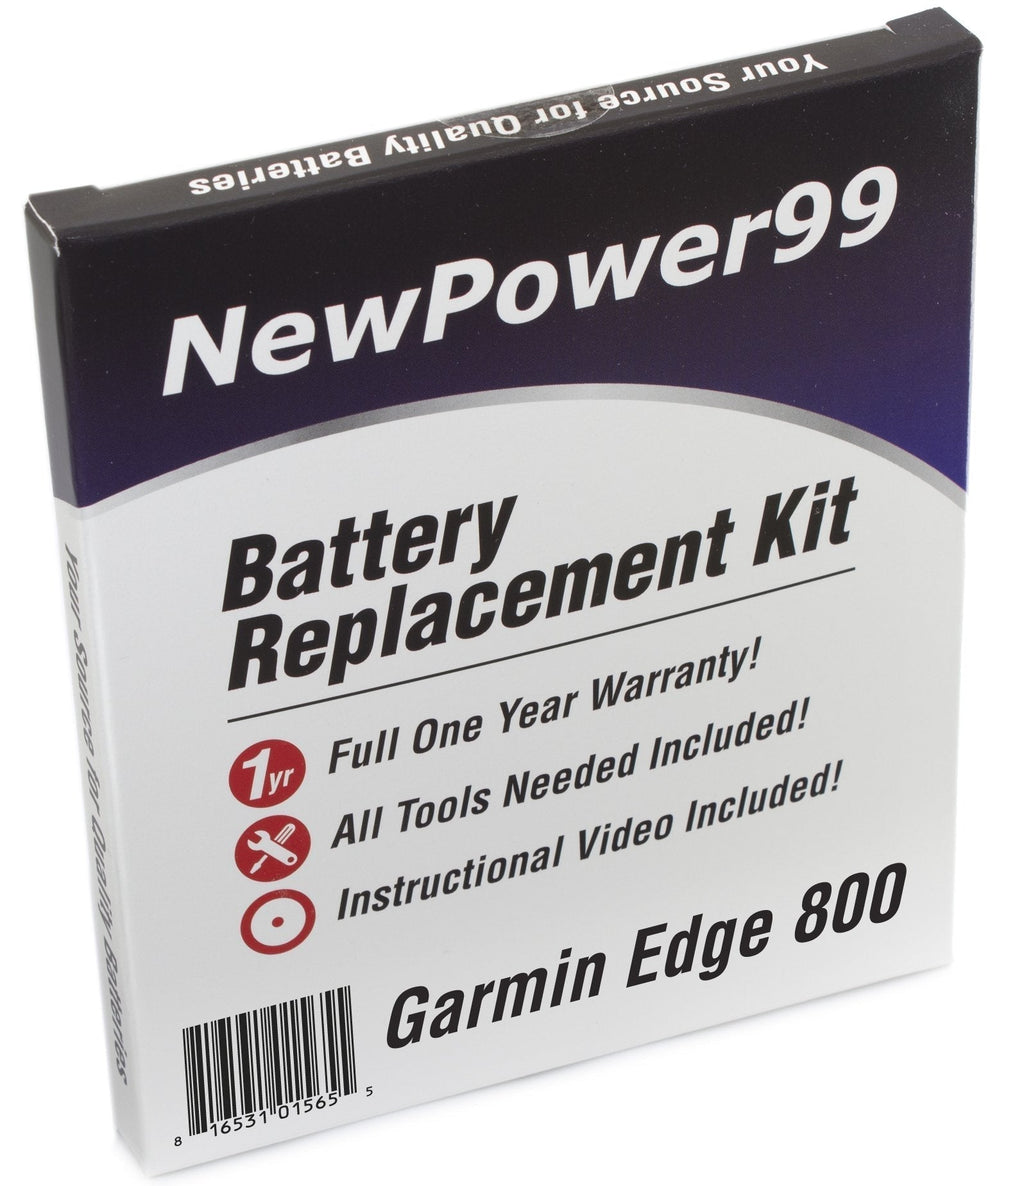  [AUSTRALIA] - NewPower99 Battery Replacement Kit for Garmin Edge 800 with Tools, Video Instructions and Long Life Battery